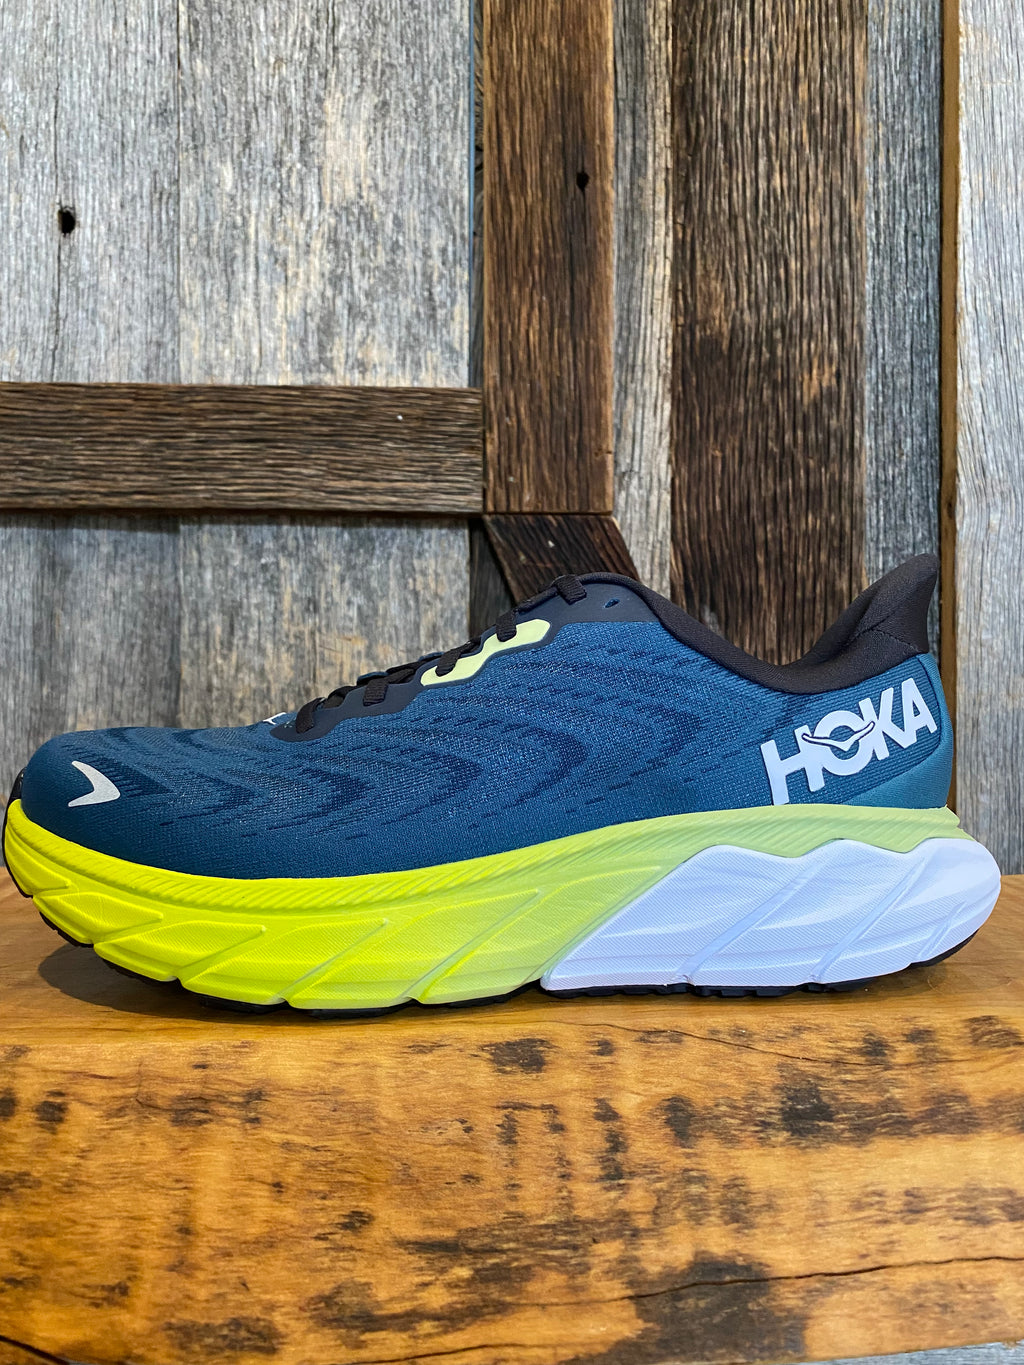 Men's Road Shoes – Ohio Valley Running Company